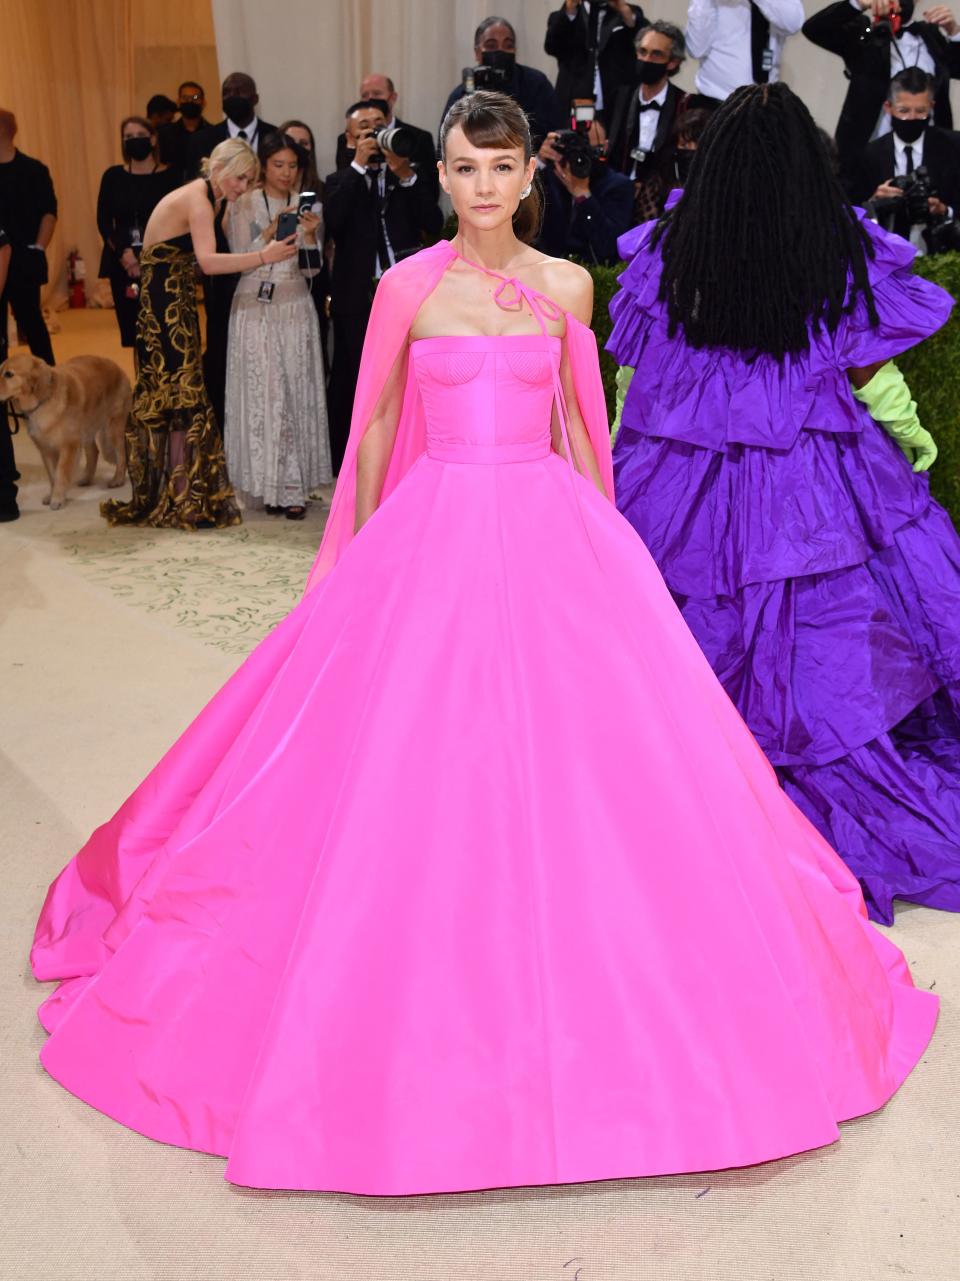 Carey Mulligan attends The 2021 Met Gala Celebrating In America: A Lexicon Of Fashion at Metropolitan Museum of Art on September 13, 2021 in New York City. (Getty Images)